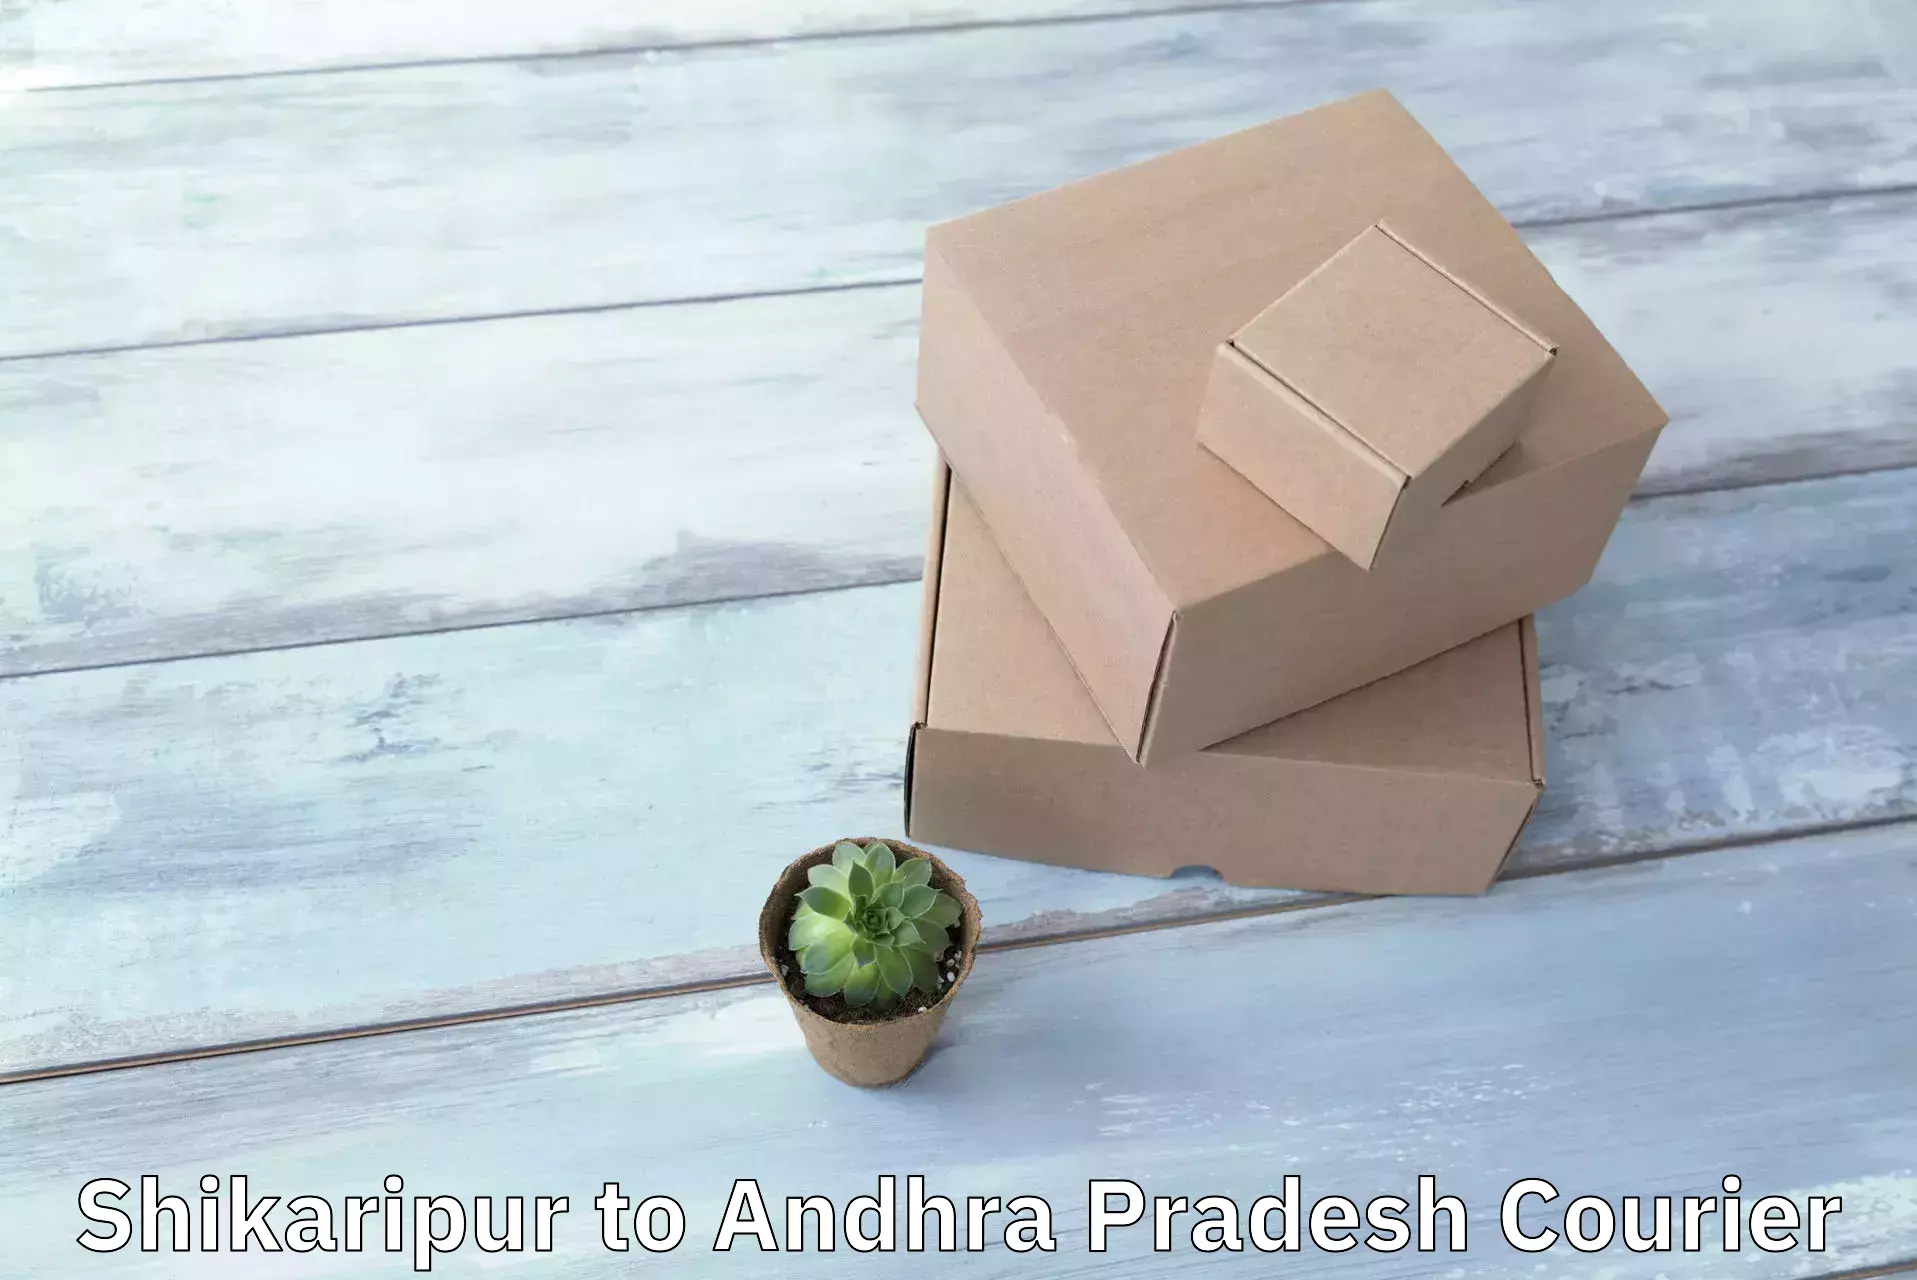 Package consolidation in Shikaripur to Andhra Pradesh